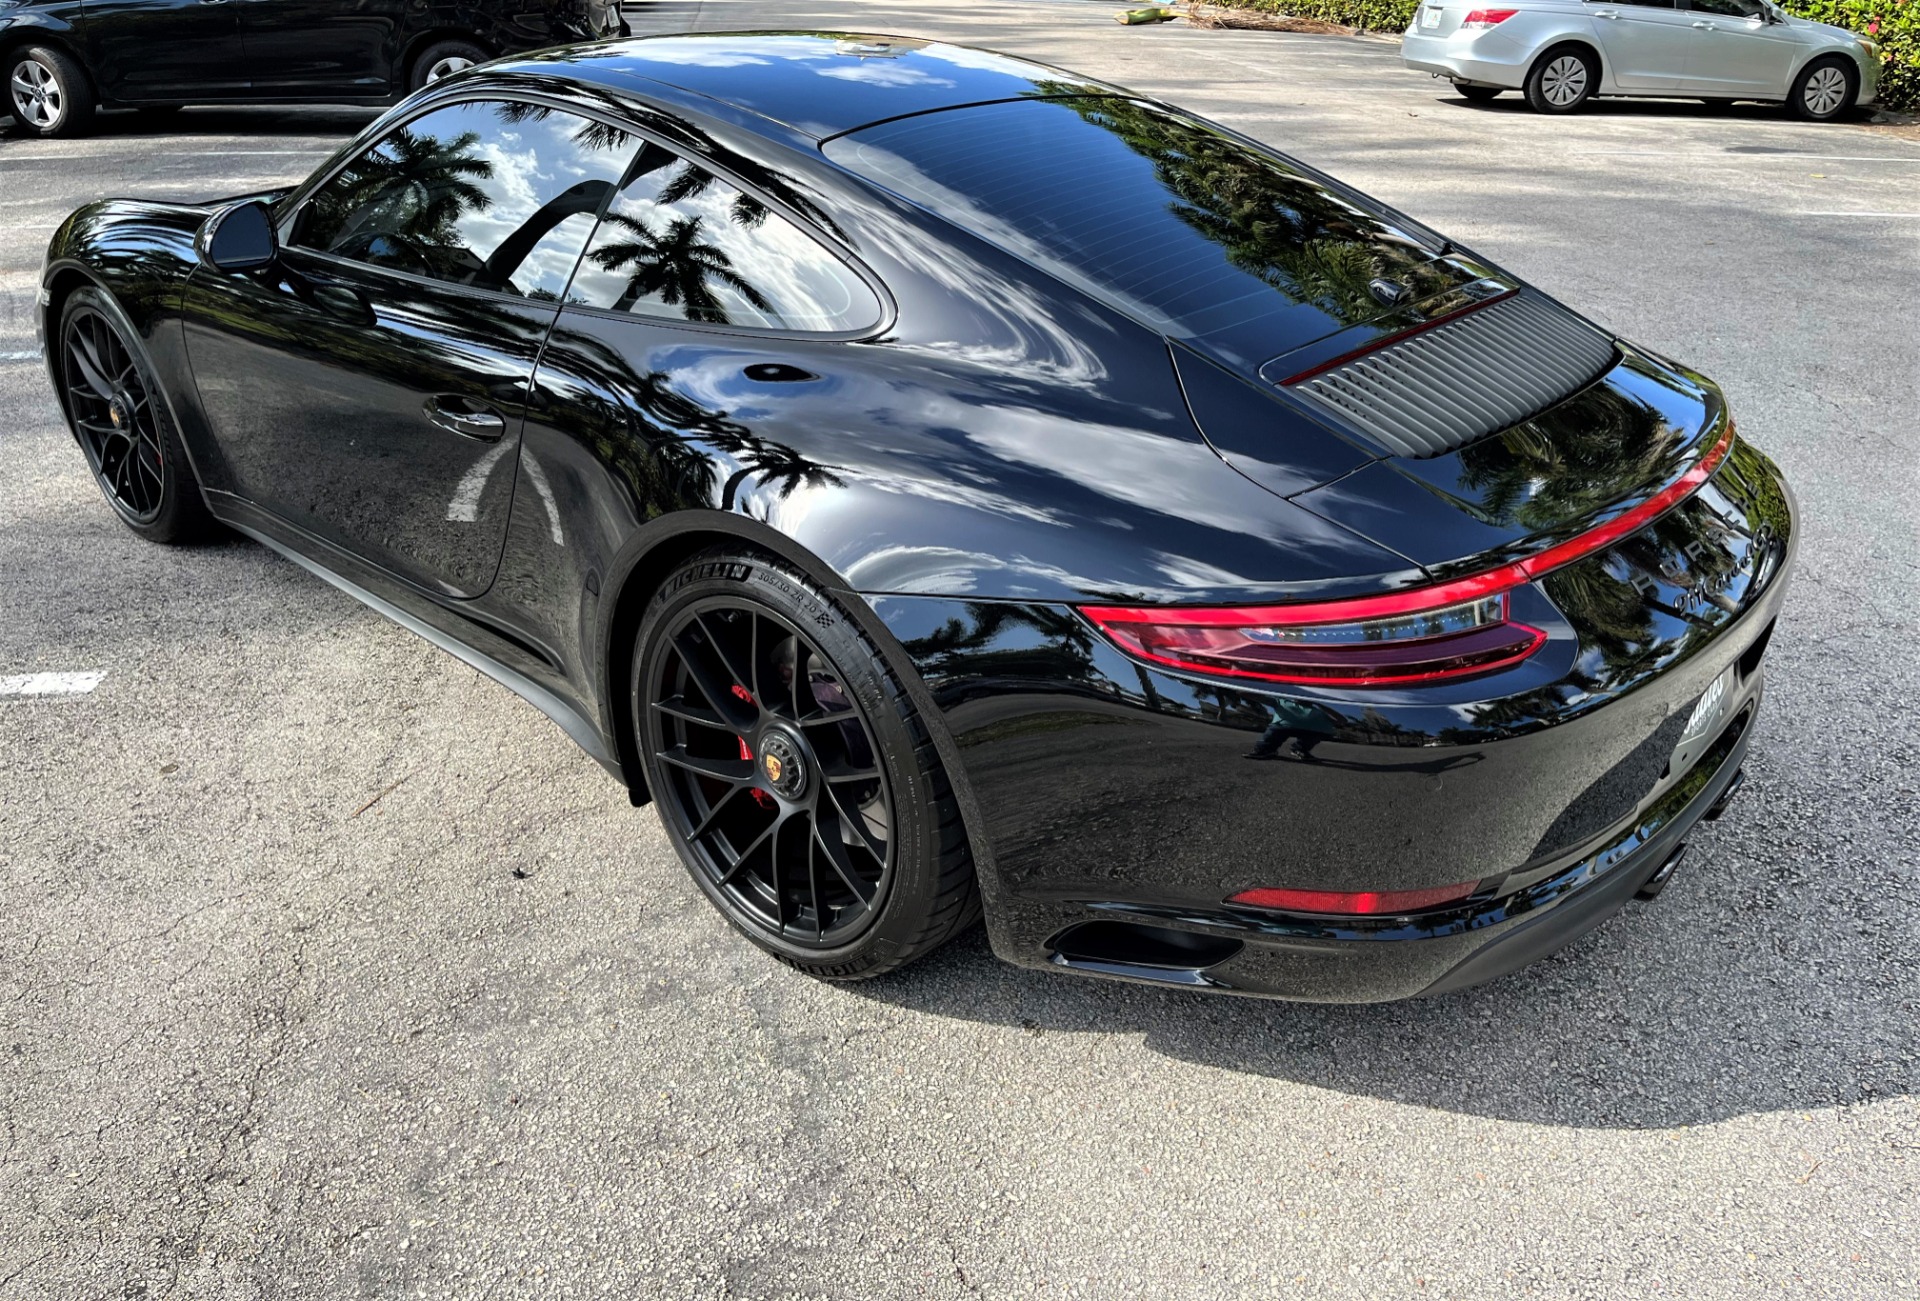 Used 2018 Porsche 911 Carrera 4 GTS for sale $139,850 at The Gables Sports Cars in Miami FL 33146 3